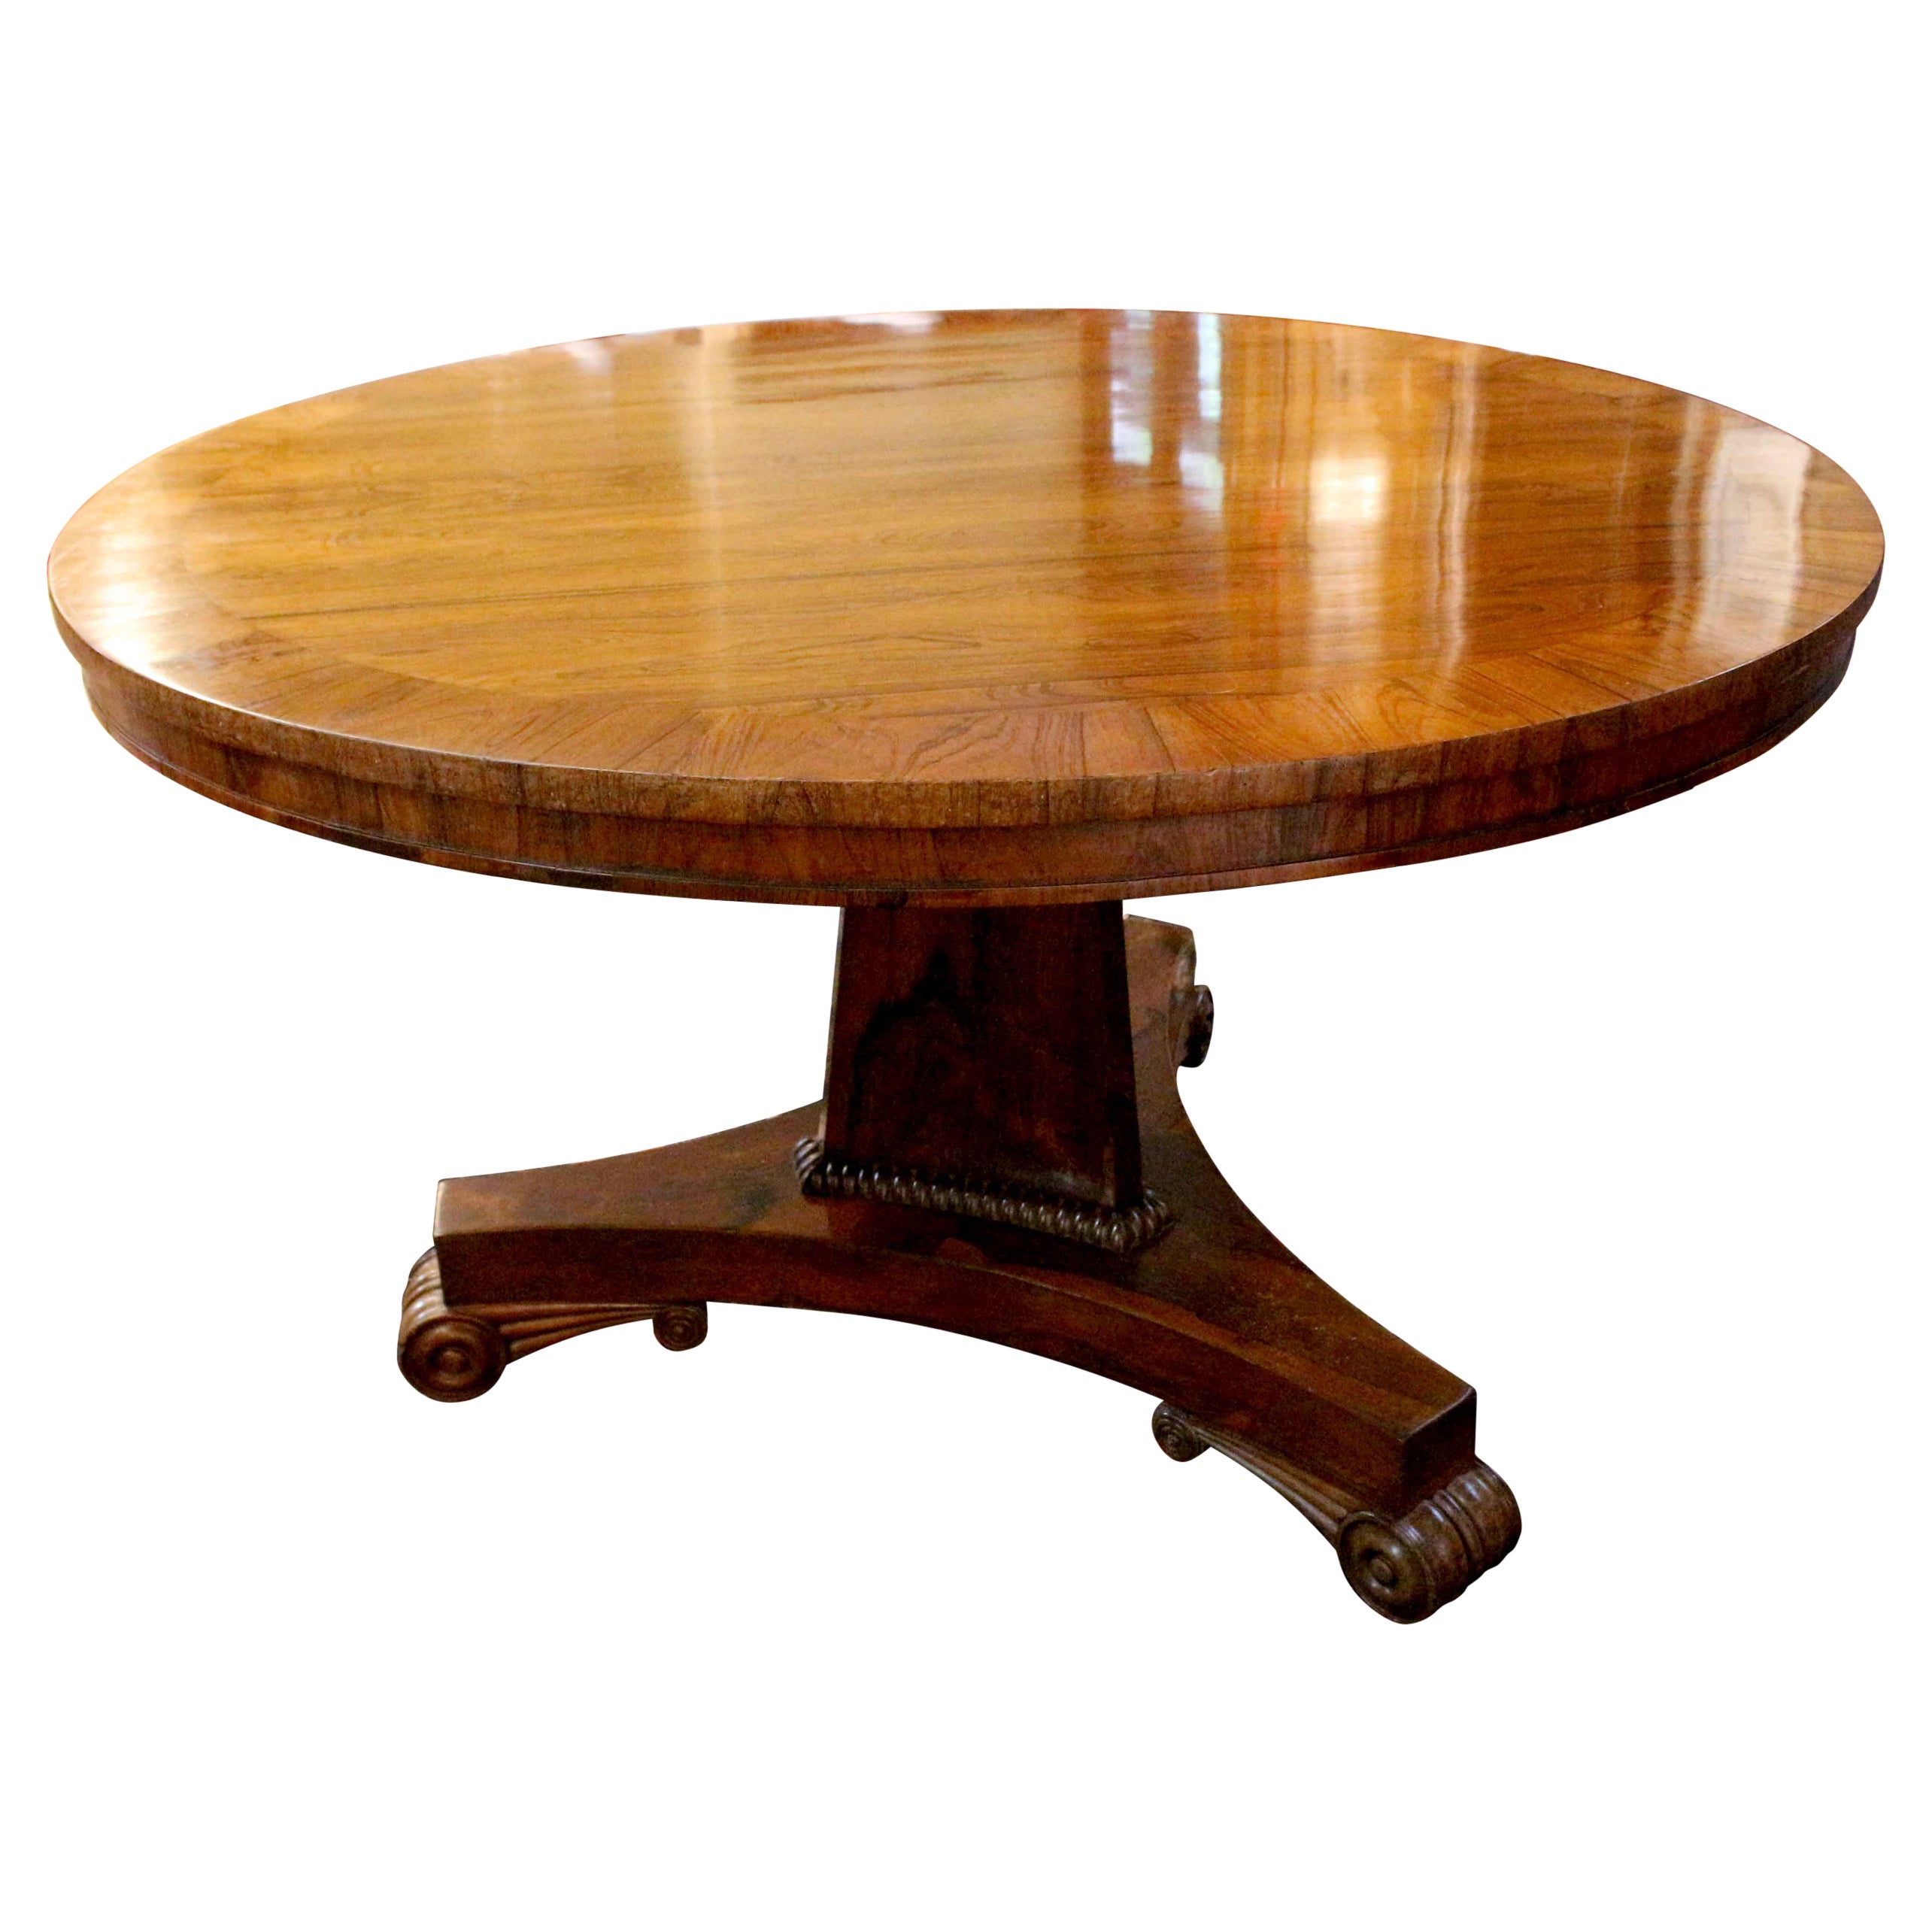 Regency Period English Center Table